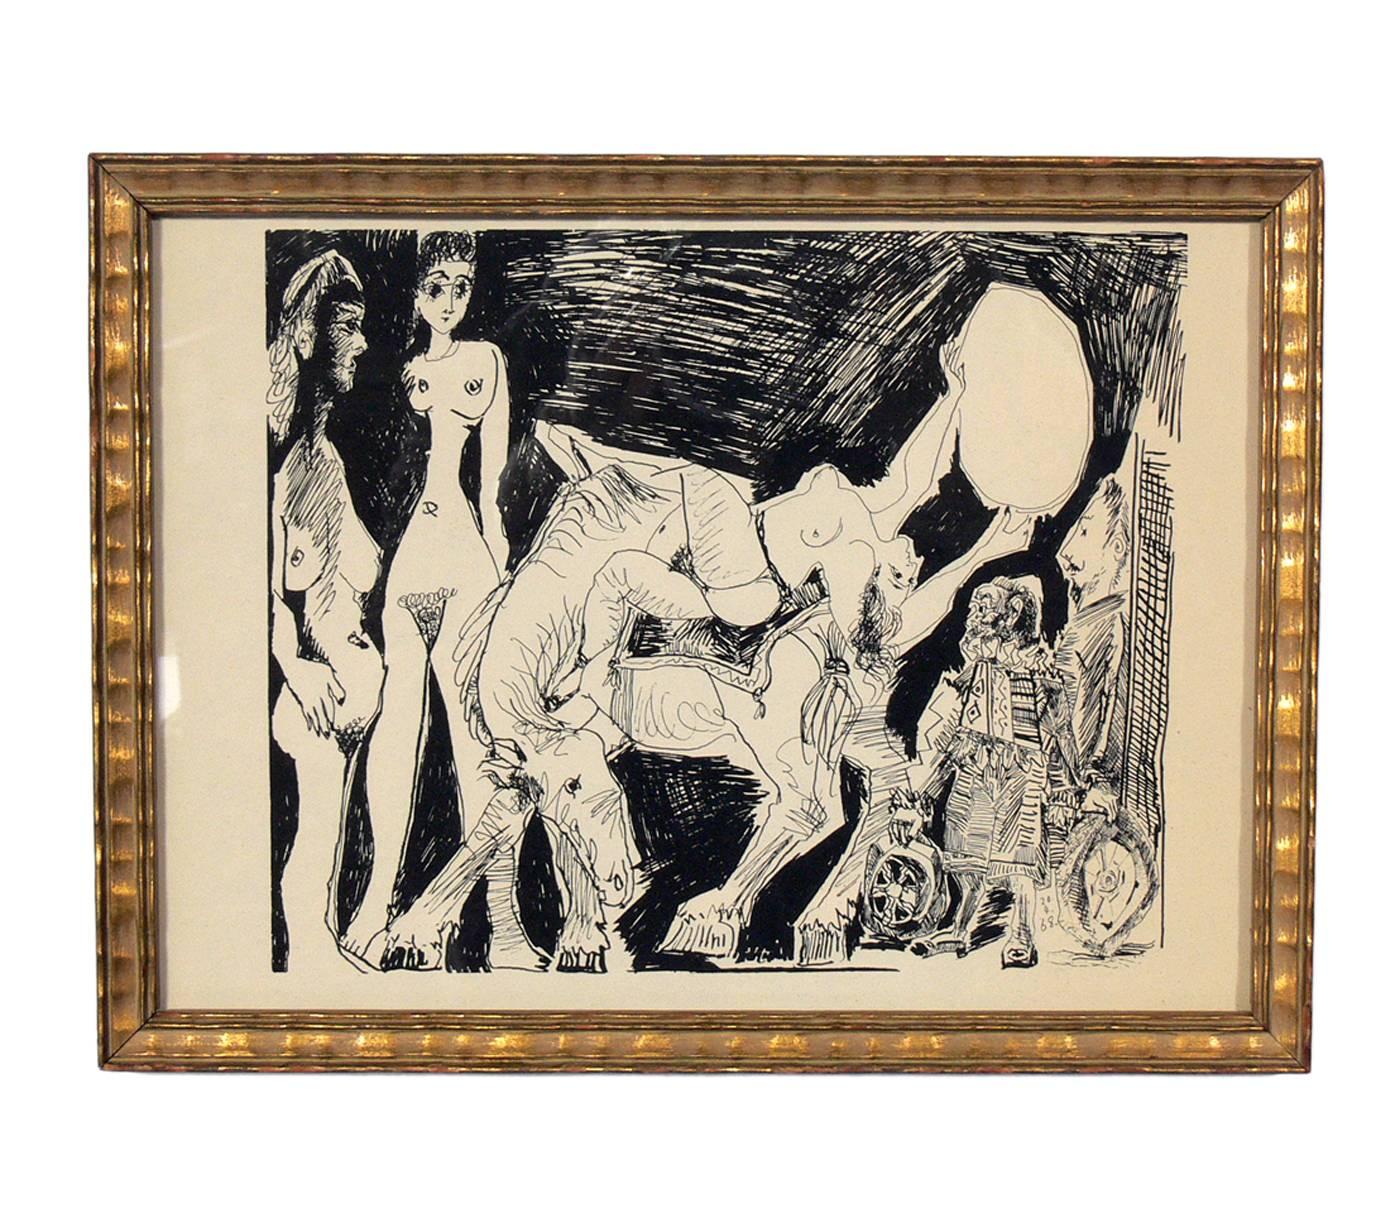 Selection of Pablo Picasso Erotic Prints, circa 1960s. They are framed in vintage gilt frames. 
1) Seen at upper left in our first photo. It measures 7.75